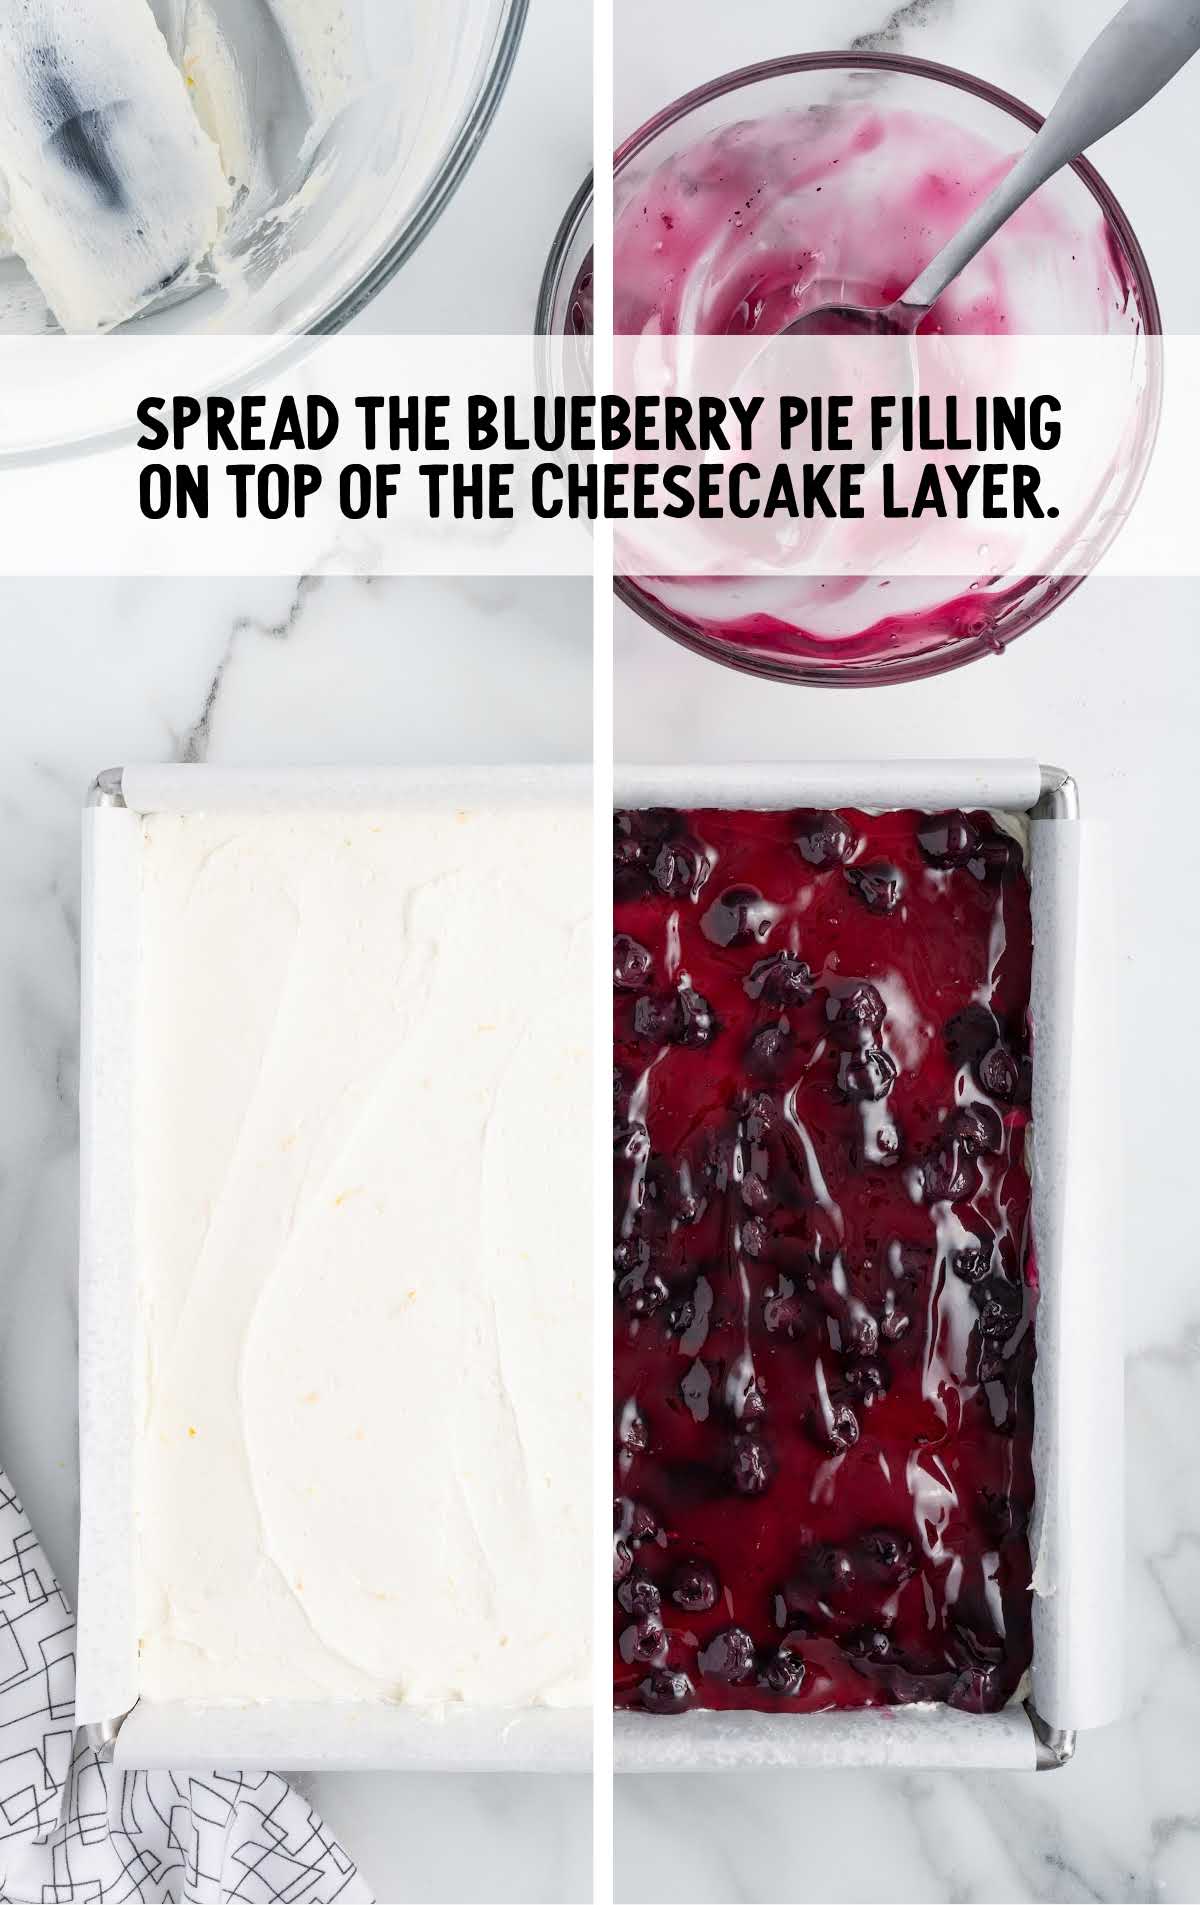 blueberry pie filling spread over the cheesecake layer